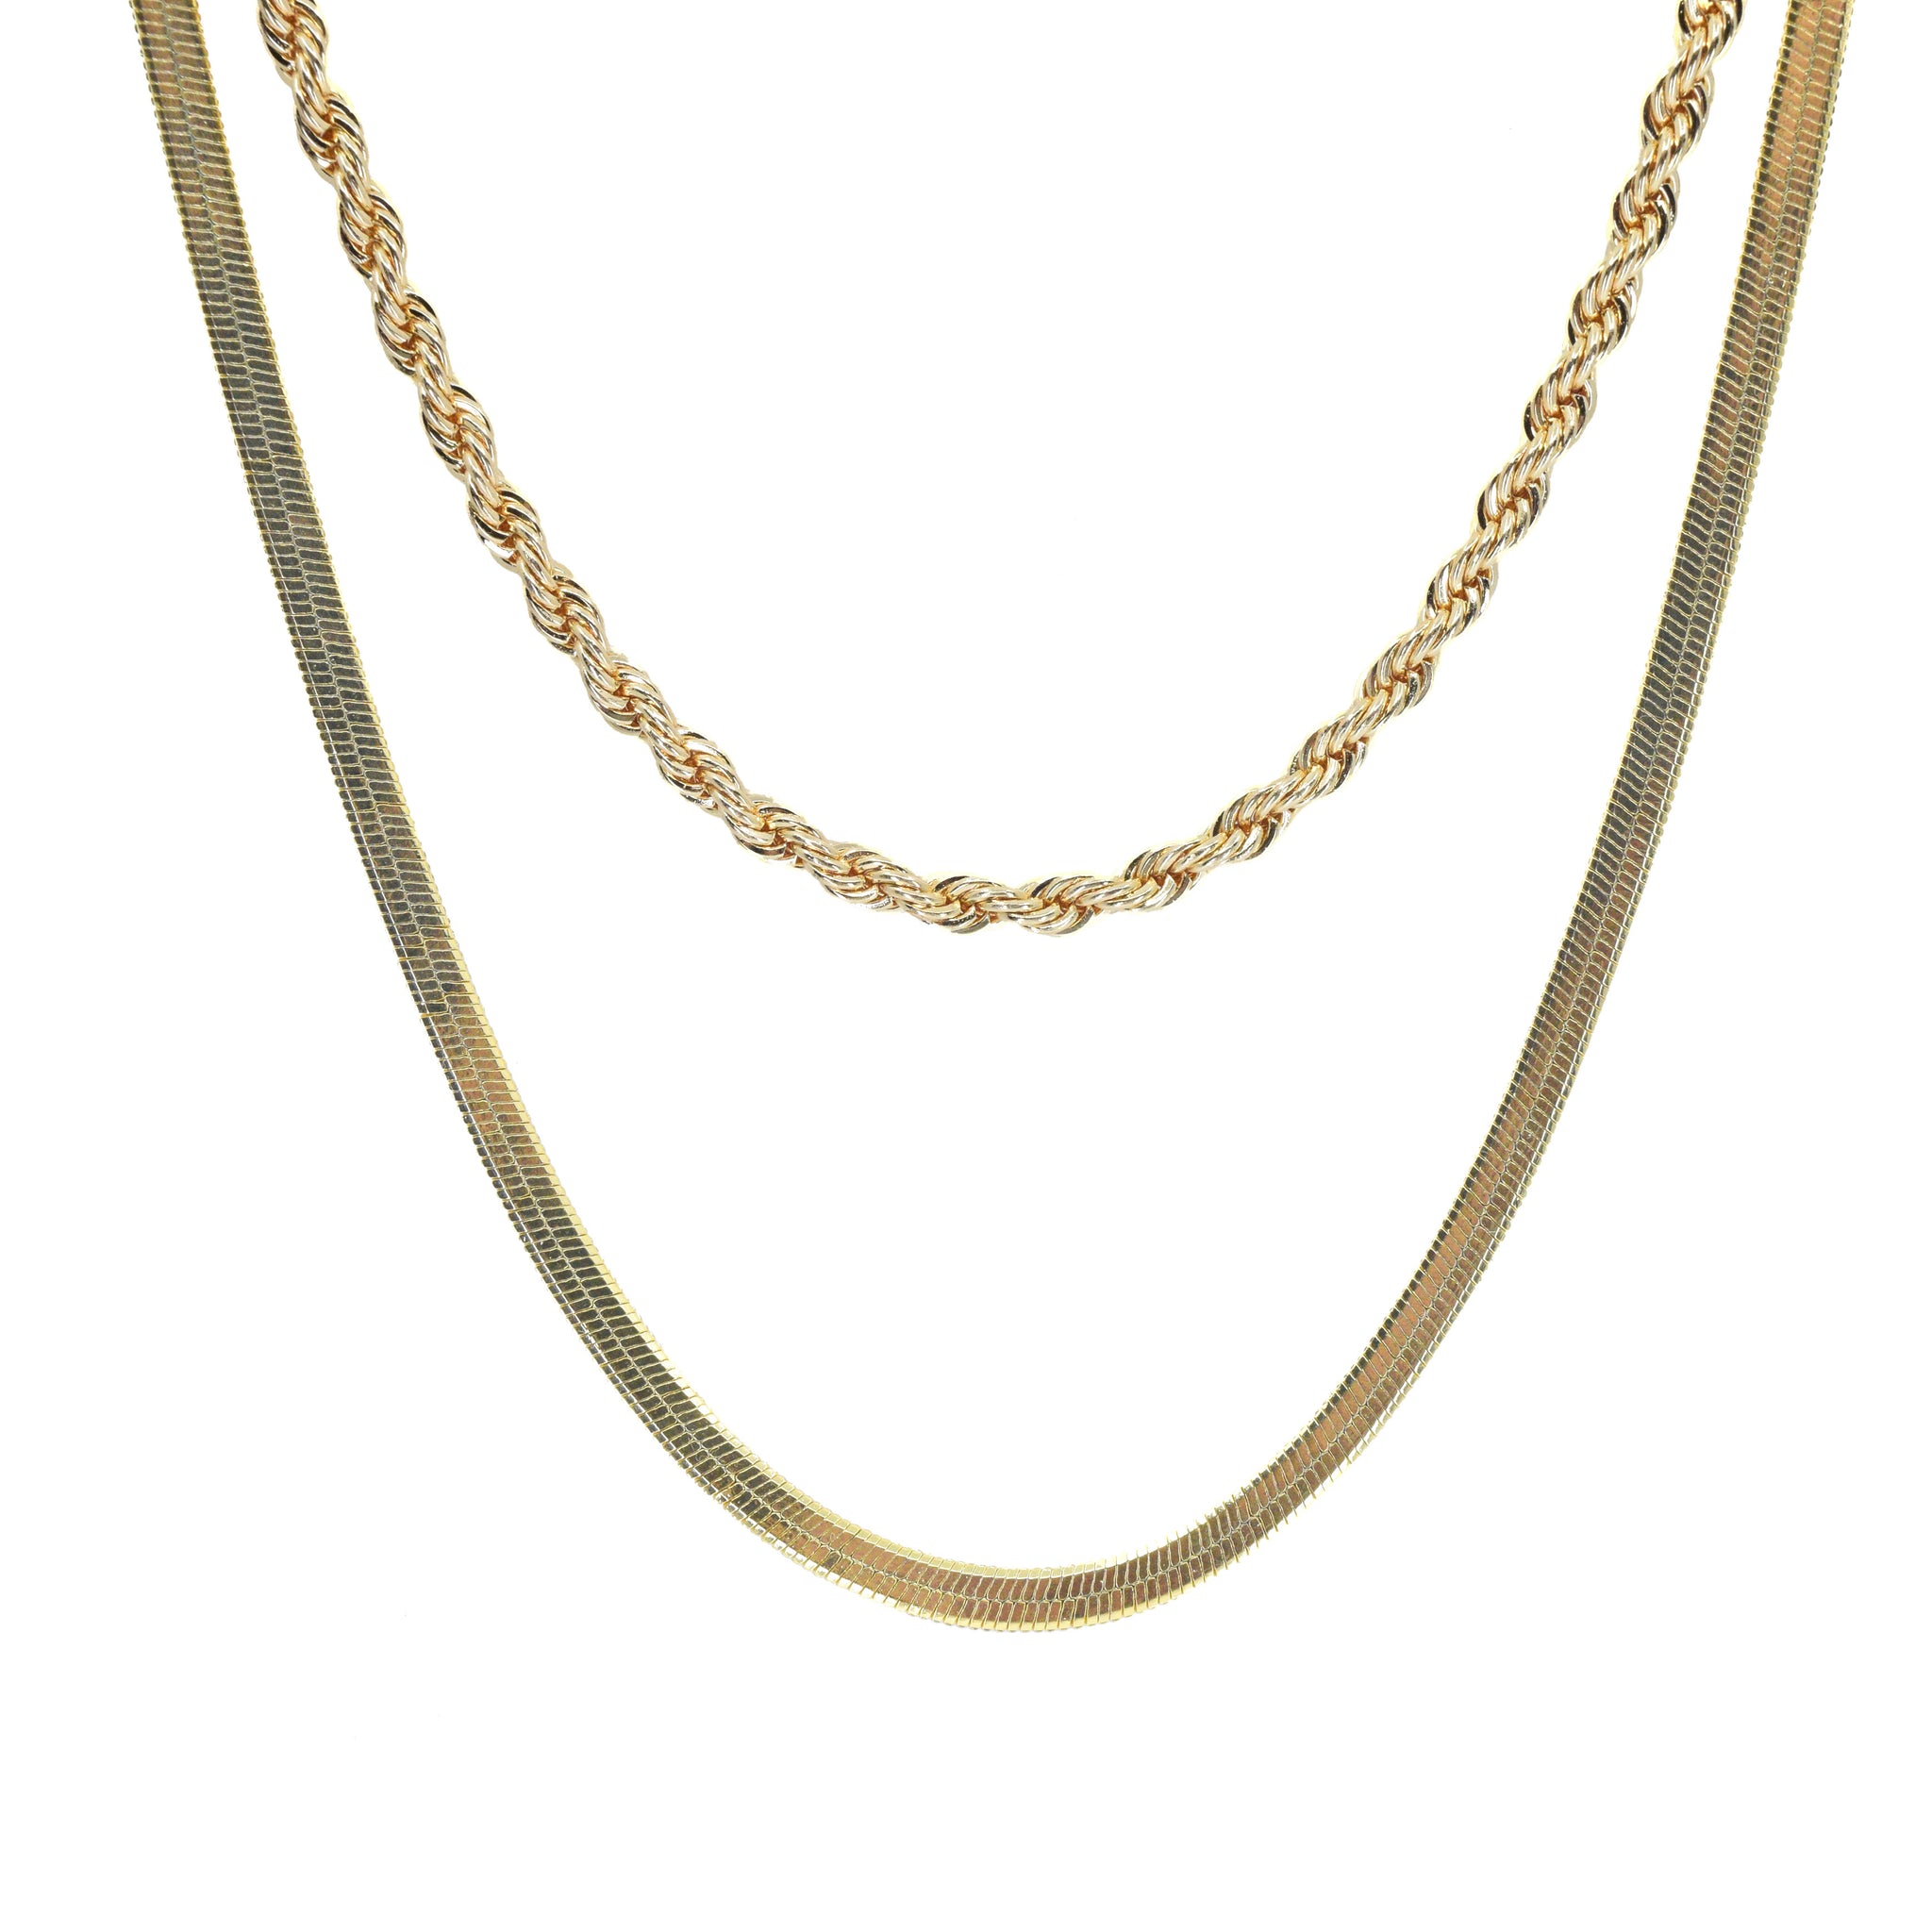 Gold Layered Necklace Set #6 - Save 20%!